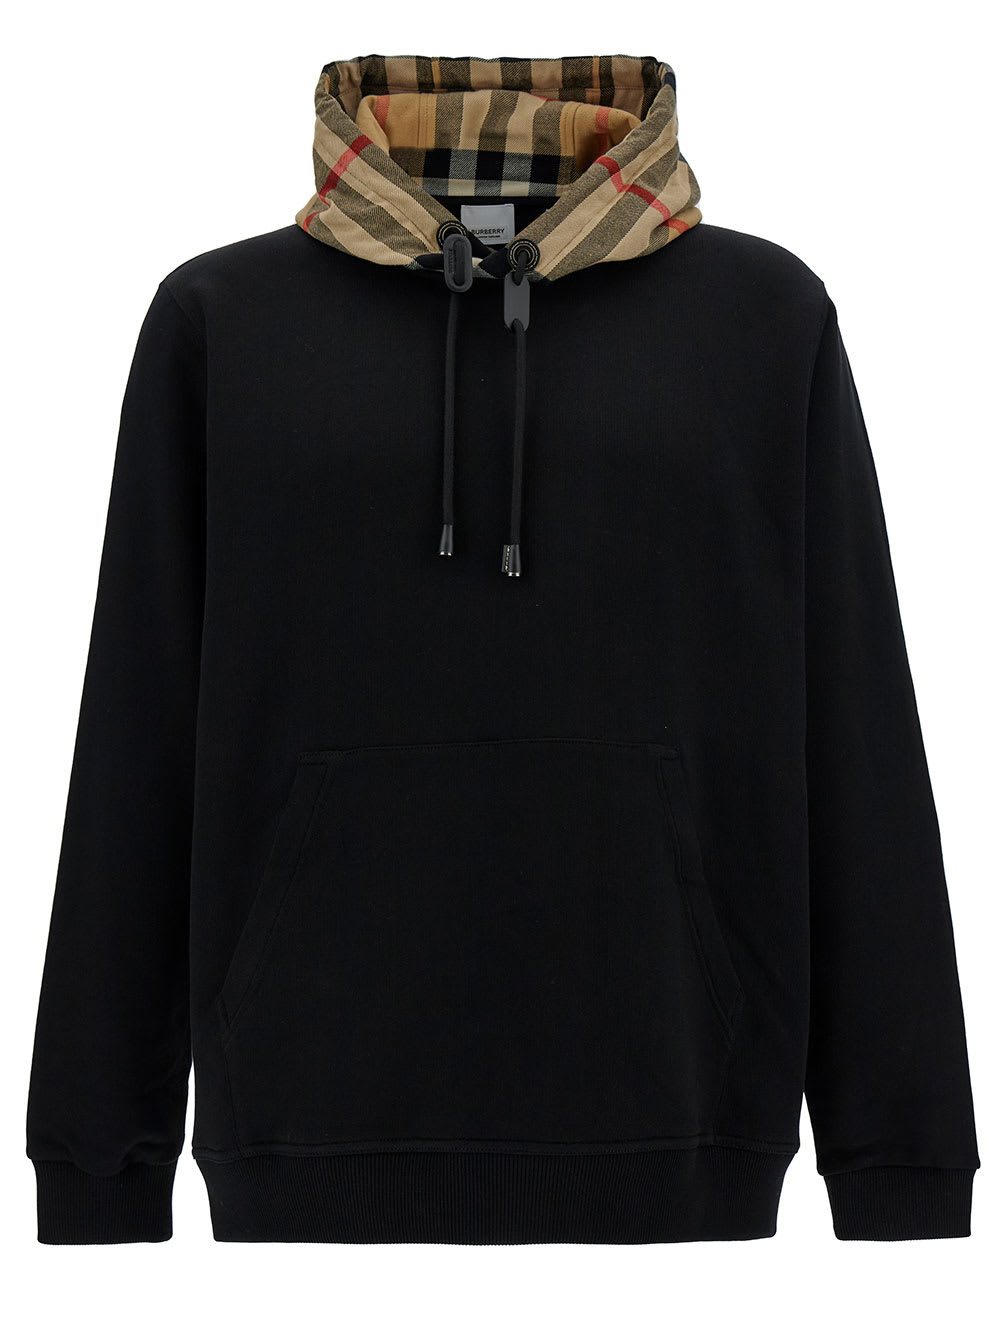 Burberry Black Sweatshirt With Vintage Check Printed Hood In Cotton Man